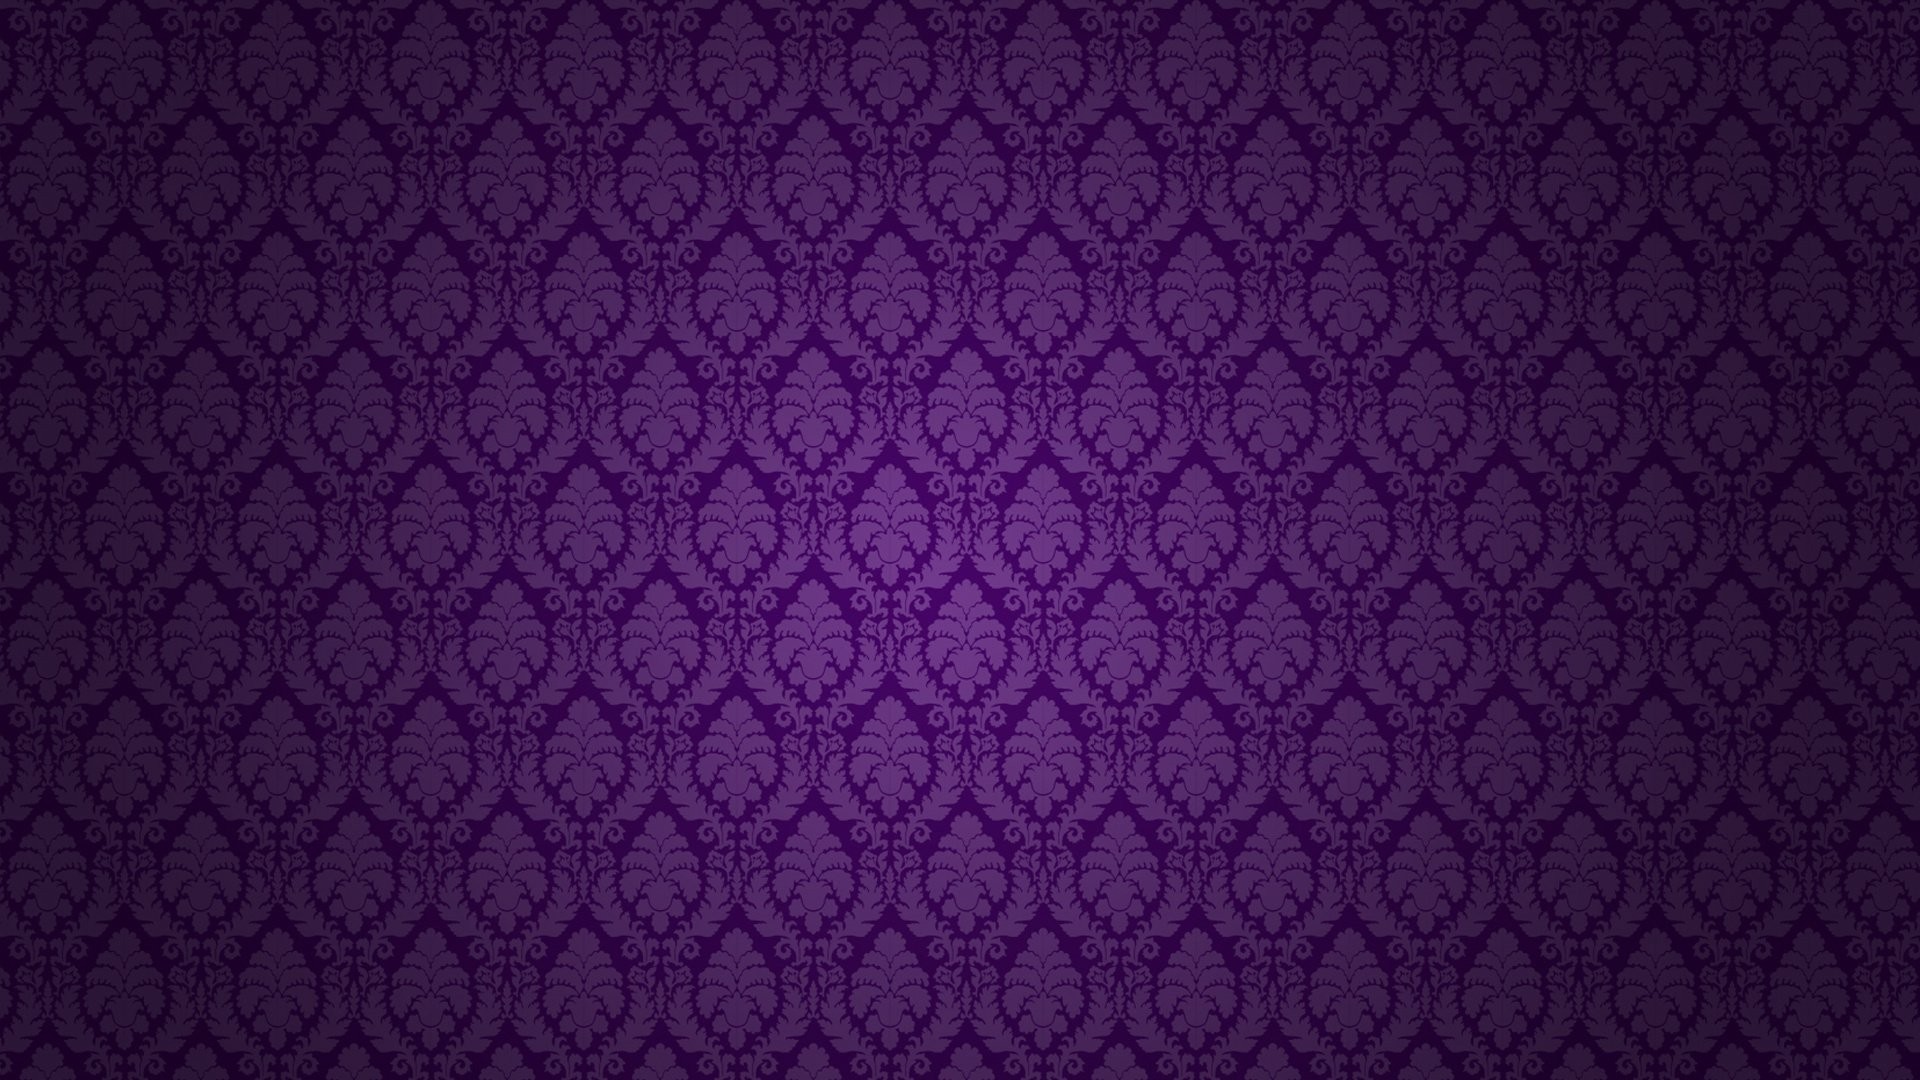 1920x1080 Purple Textured Backgrounds wallpaper |  | #32886 Texture Textured  Lined Blacked Purple - WallDevil ...